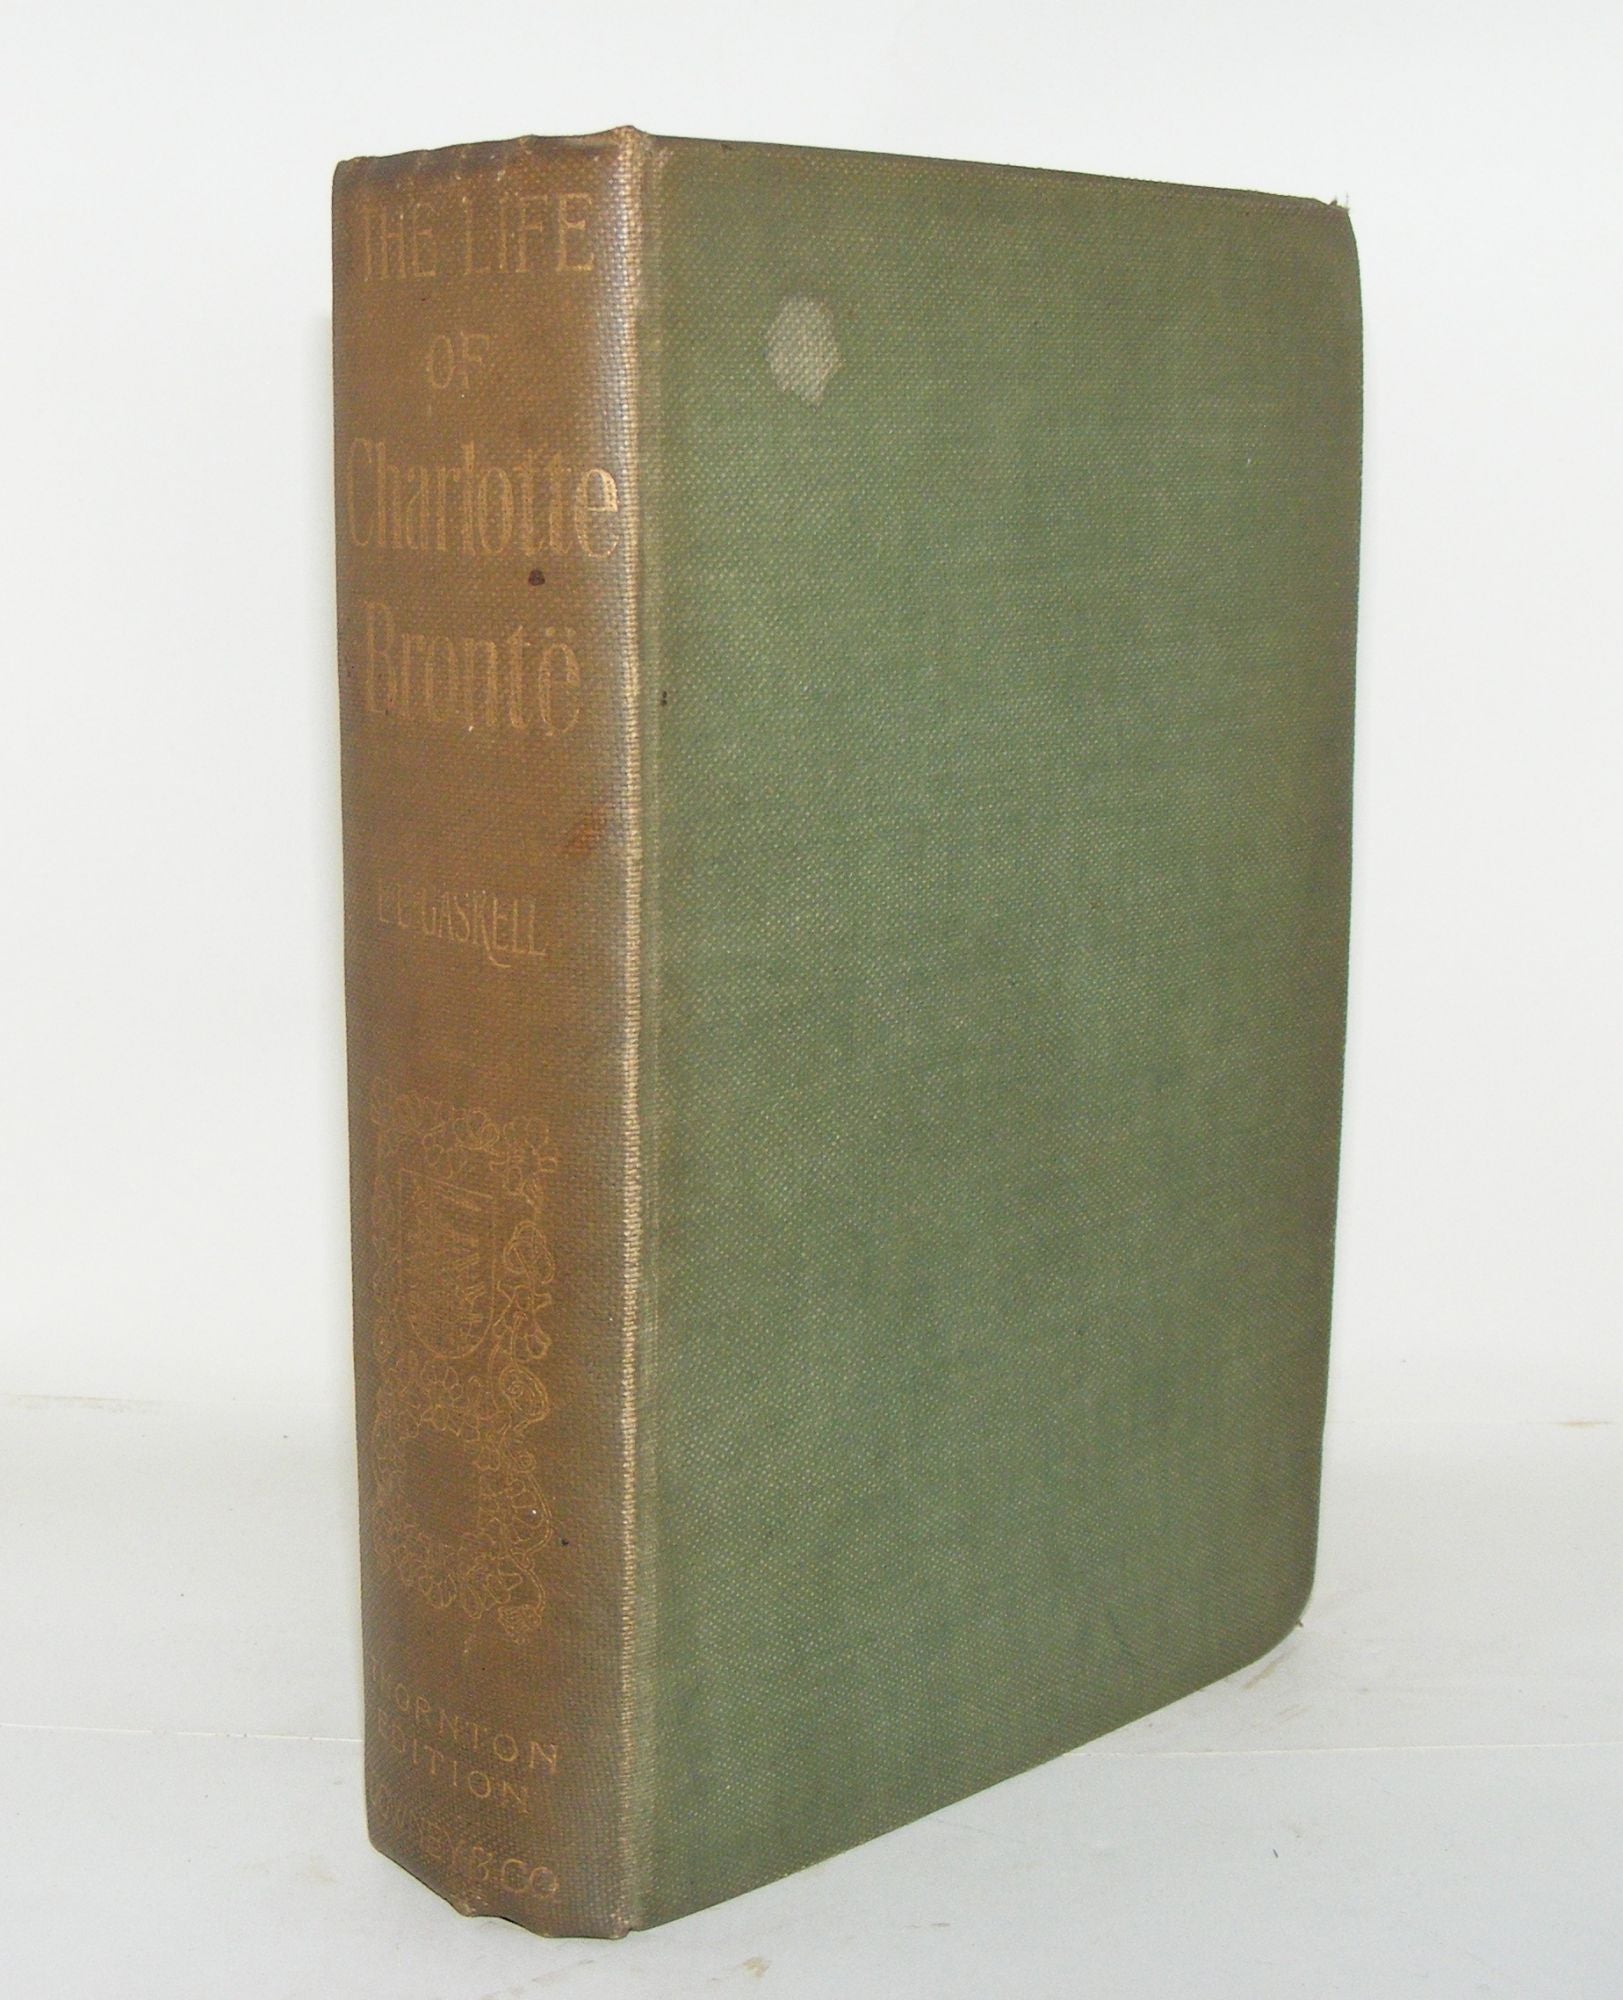 GASKELL E.C., SCOTT Temple, WILLETT B.W. - The Life of Charlotte Bronte Reprinted from the First Edition and Edited with an Introduction and Notes